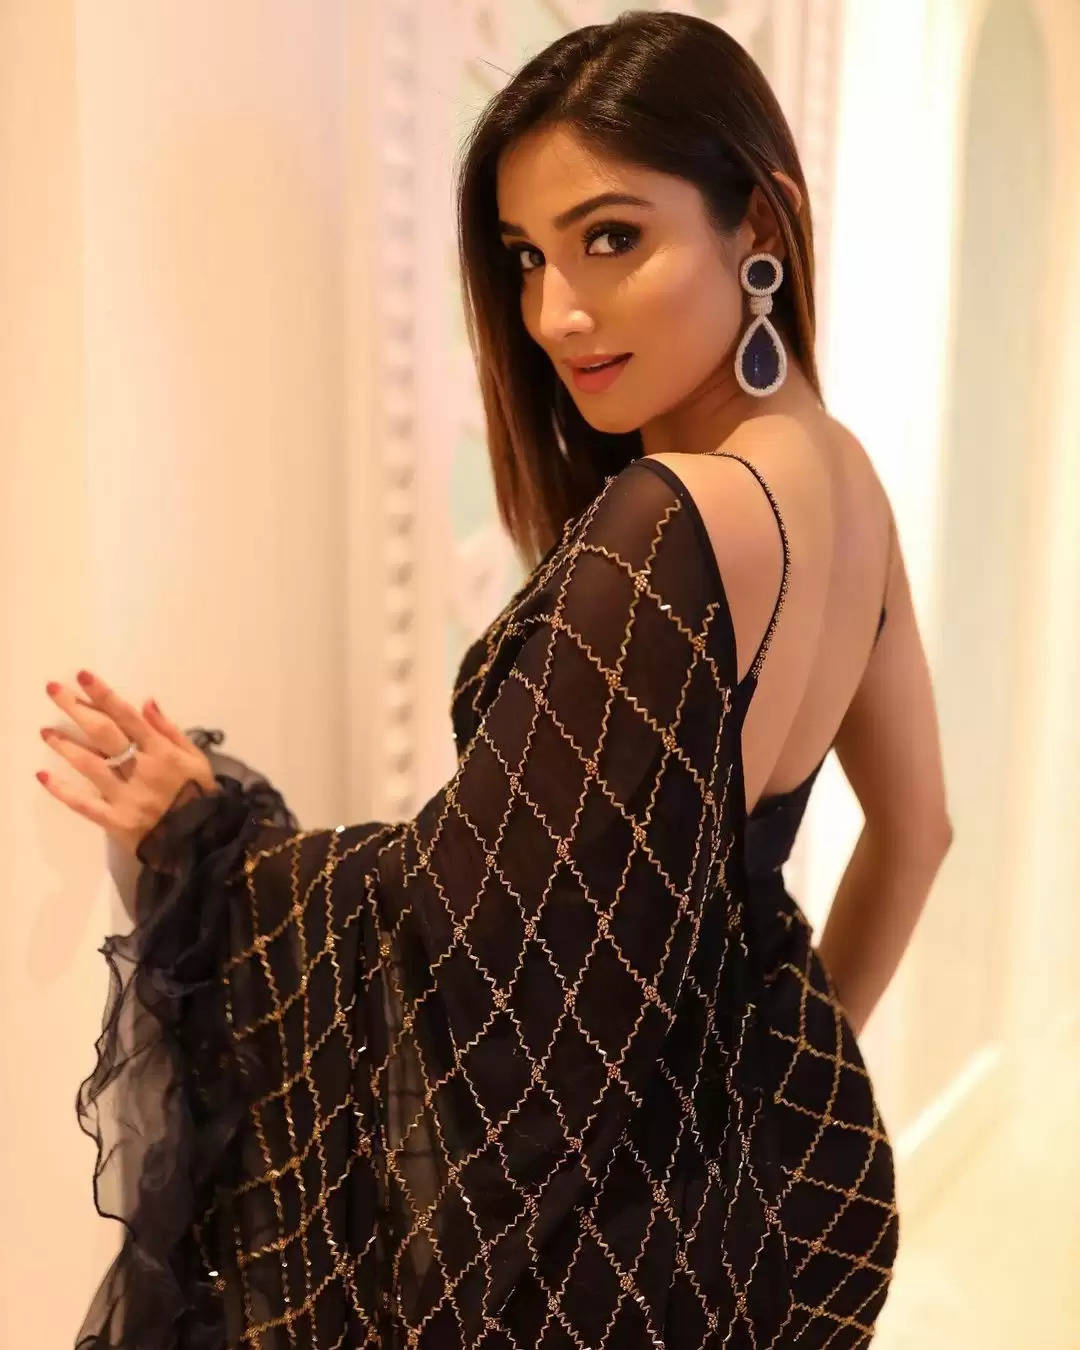 Photos: Donal Bisht flaunts her beauty wearing a saree, See here....